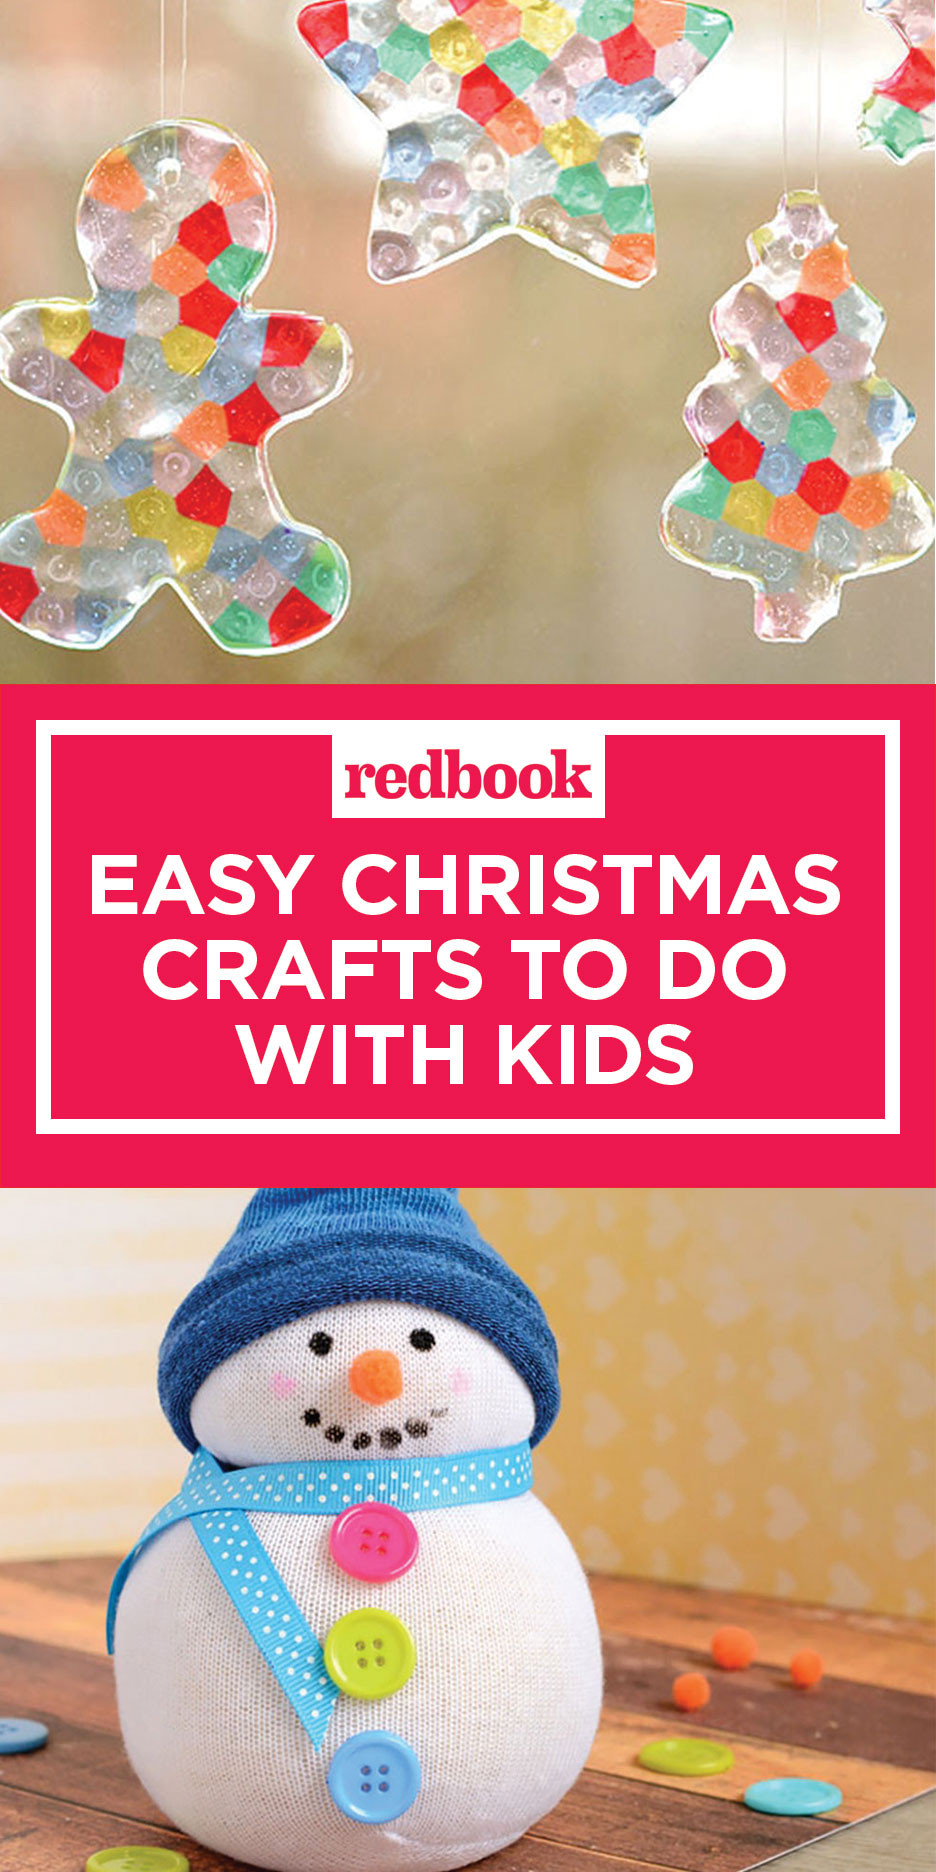 Easy Christmas Arts And Crafts
 Easy Christmas Crafts for Kids Holiday Arts and Crafts